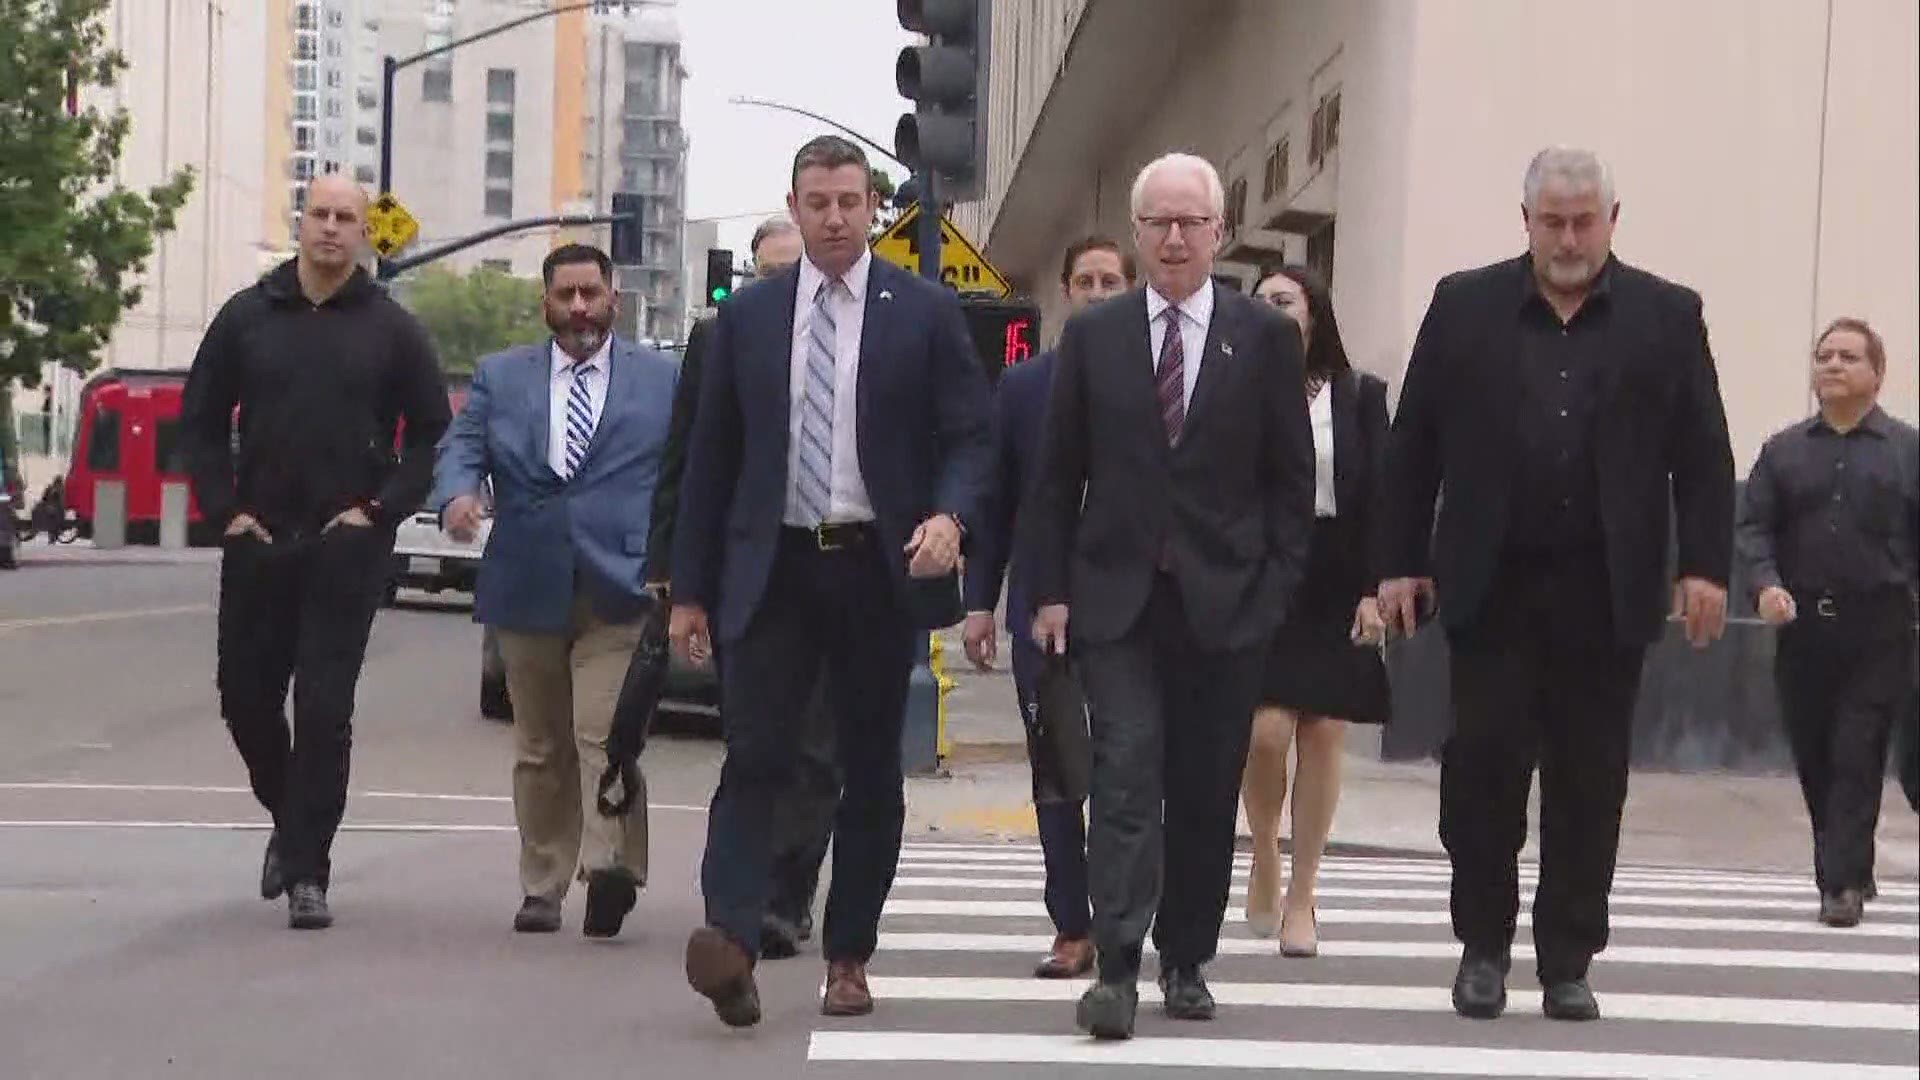 Rep. Duncan Hunter pleaded guilty before a federal judge in San Diego Tuesday to a federal charge of conspiracy to misuse campaign funds.